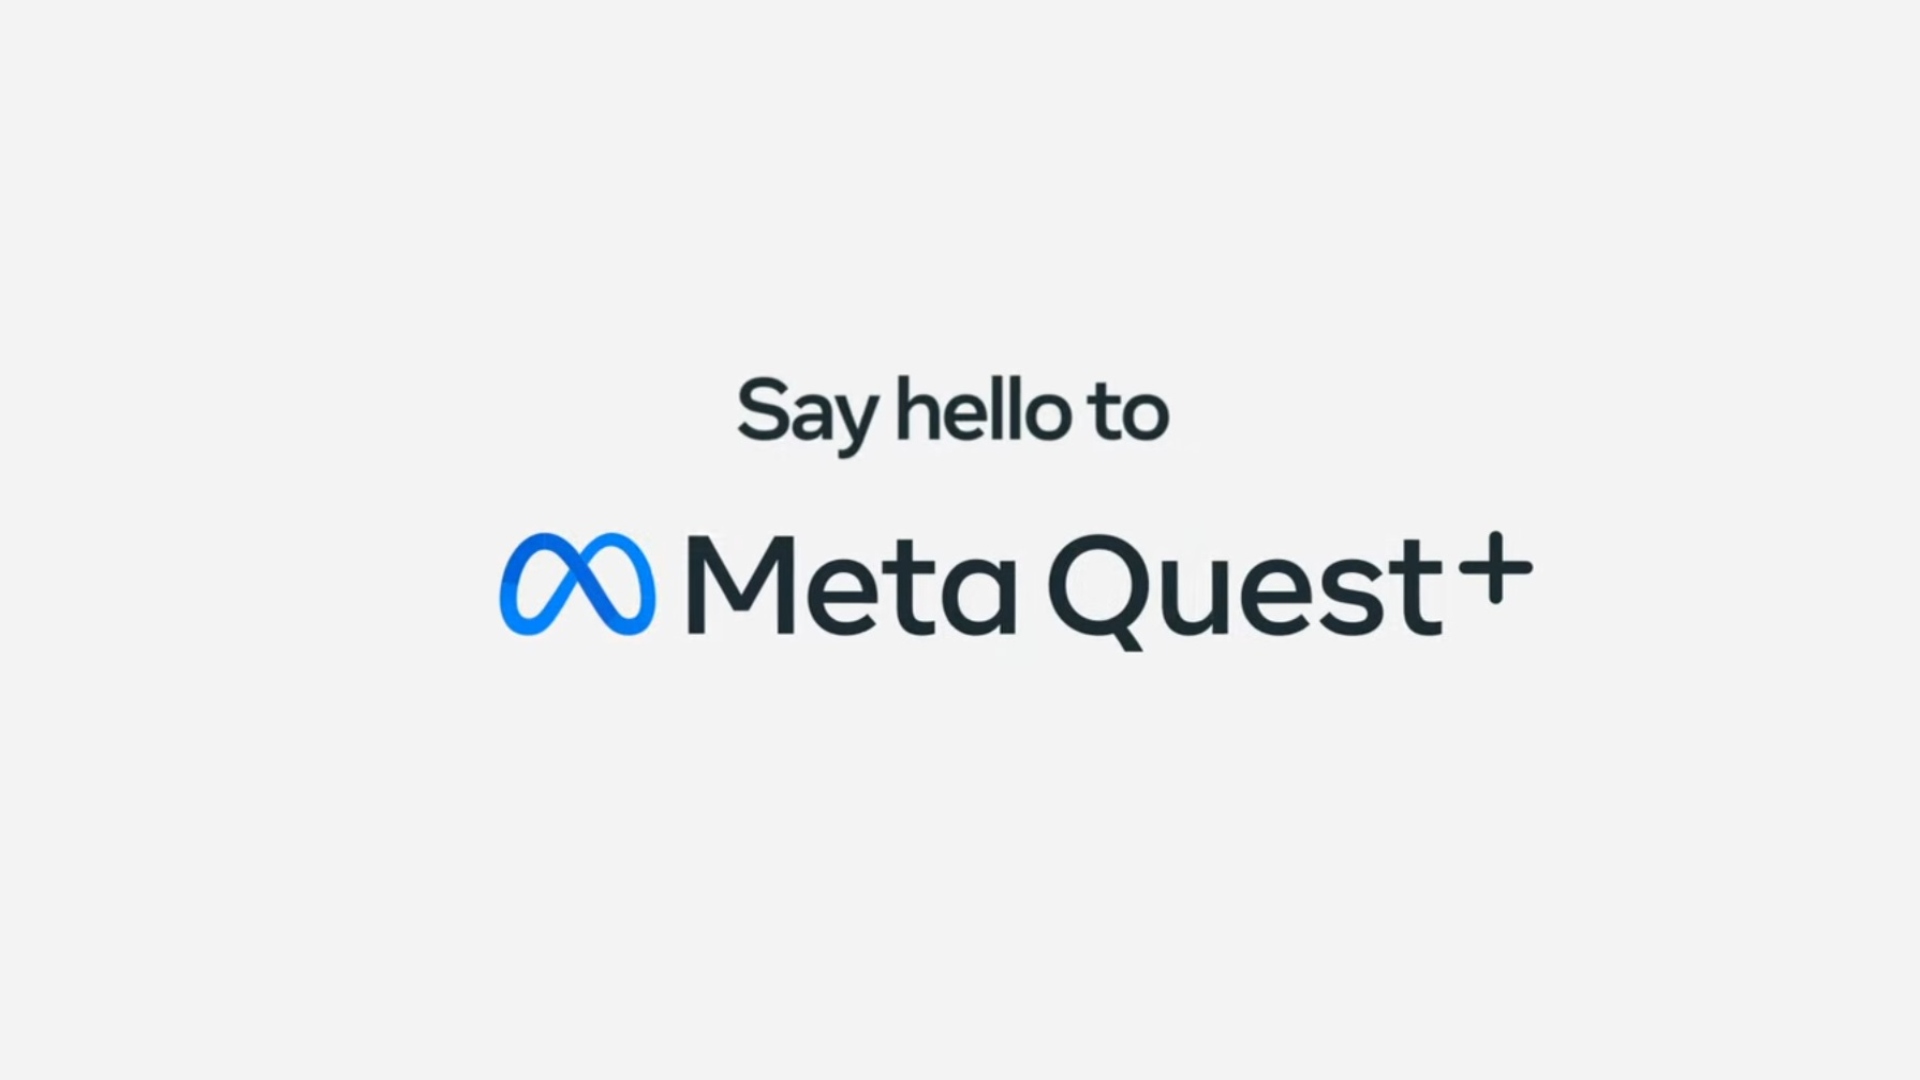 How to play Roblox on Meta Quest VR: Release date, compatibility, more -  Dexerto